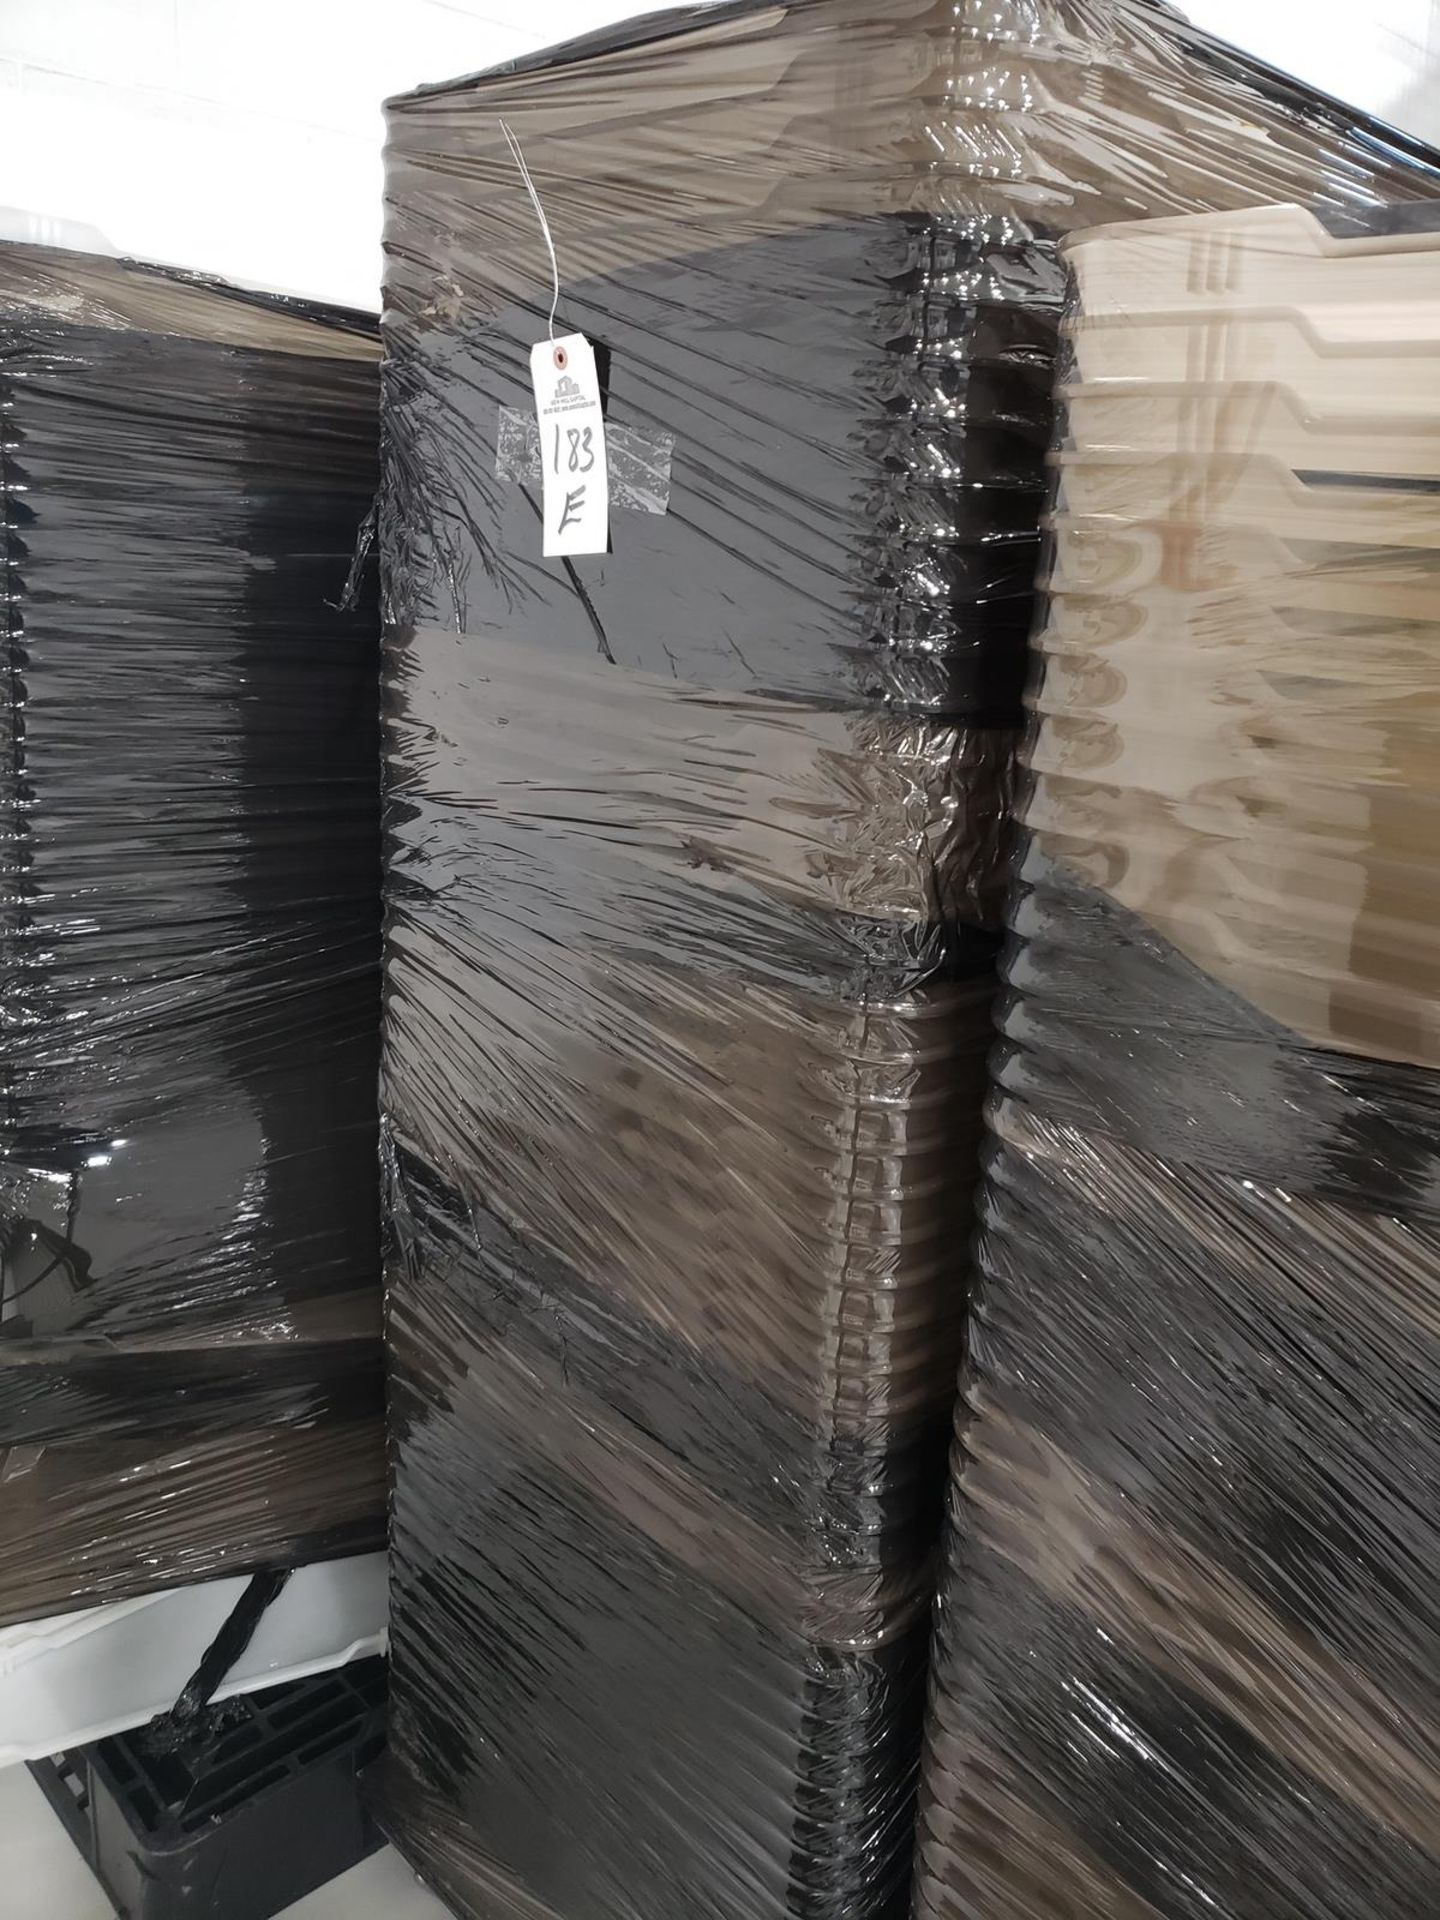 Lot of (50) 23 1/2" X 29 1/2" Plastic Product Trays | Rig Fee $40